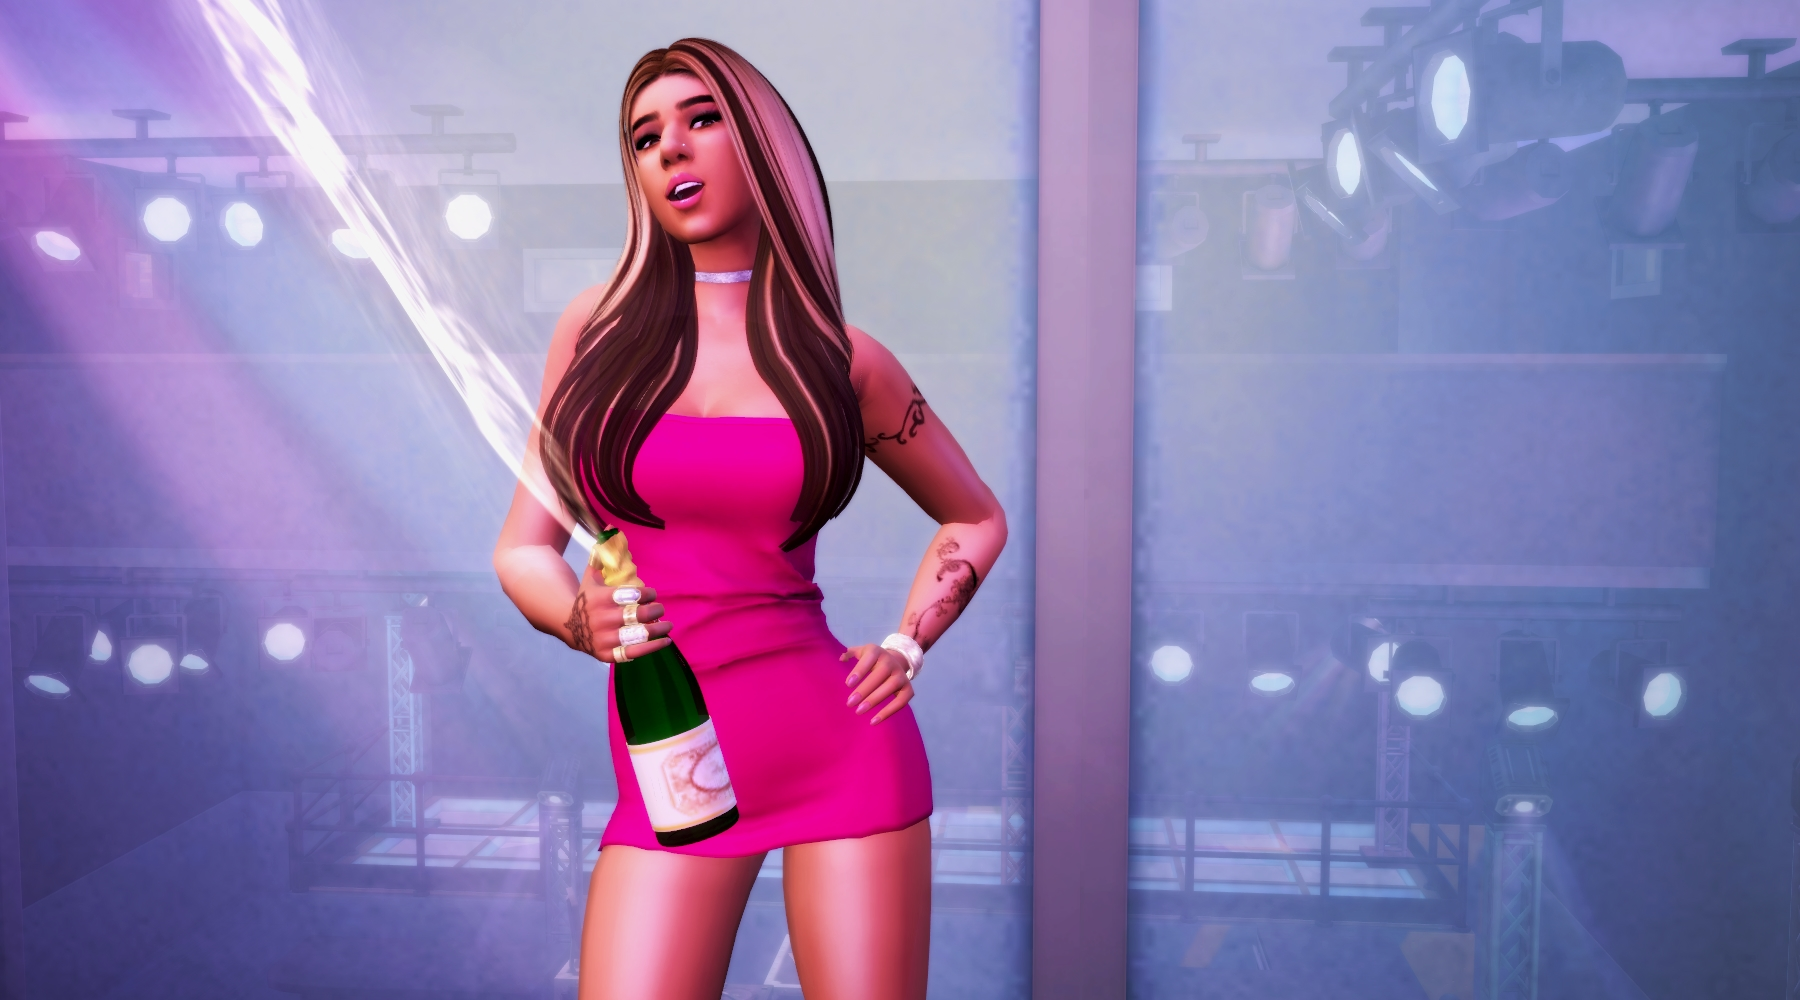 Share Your Female Sims Page 117 The Sims 4 General